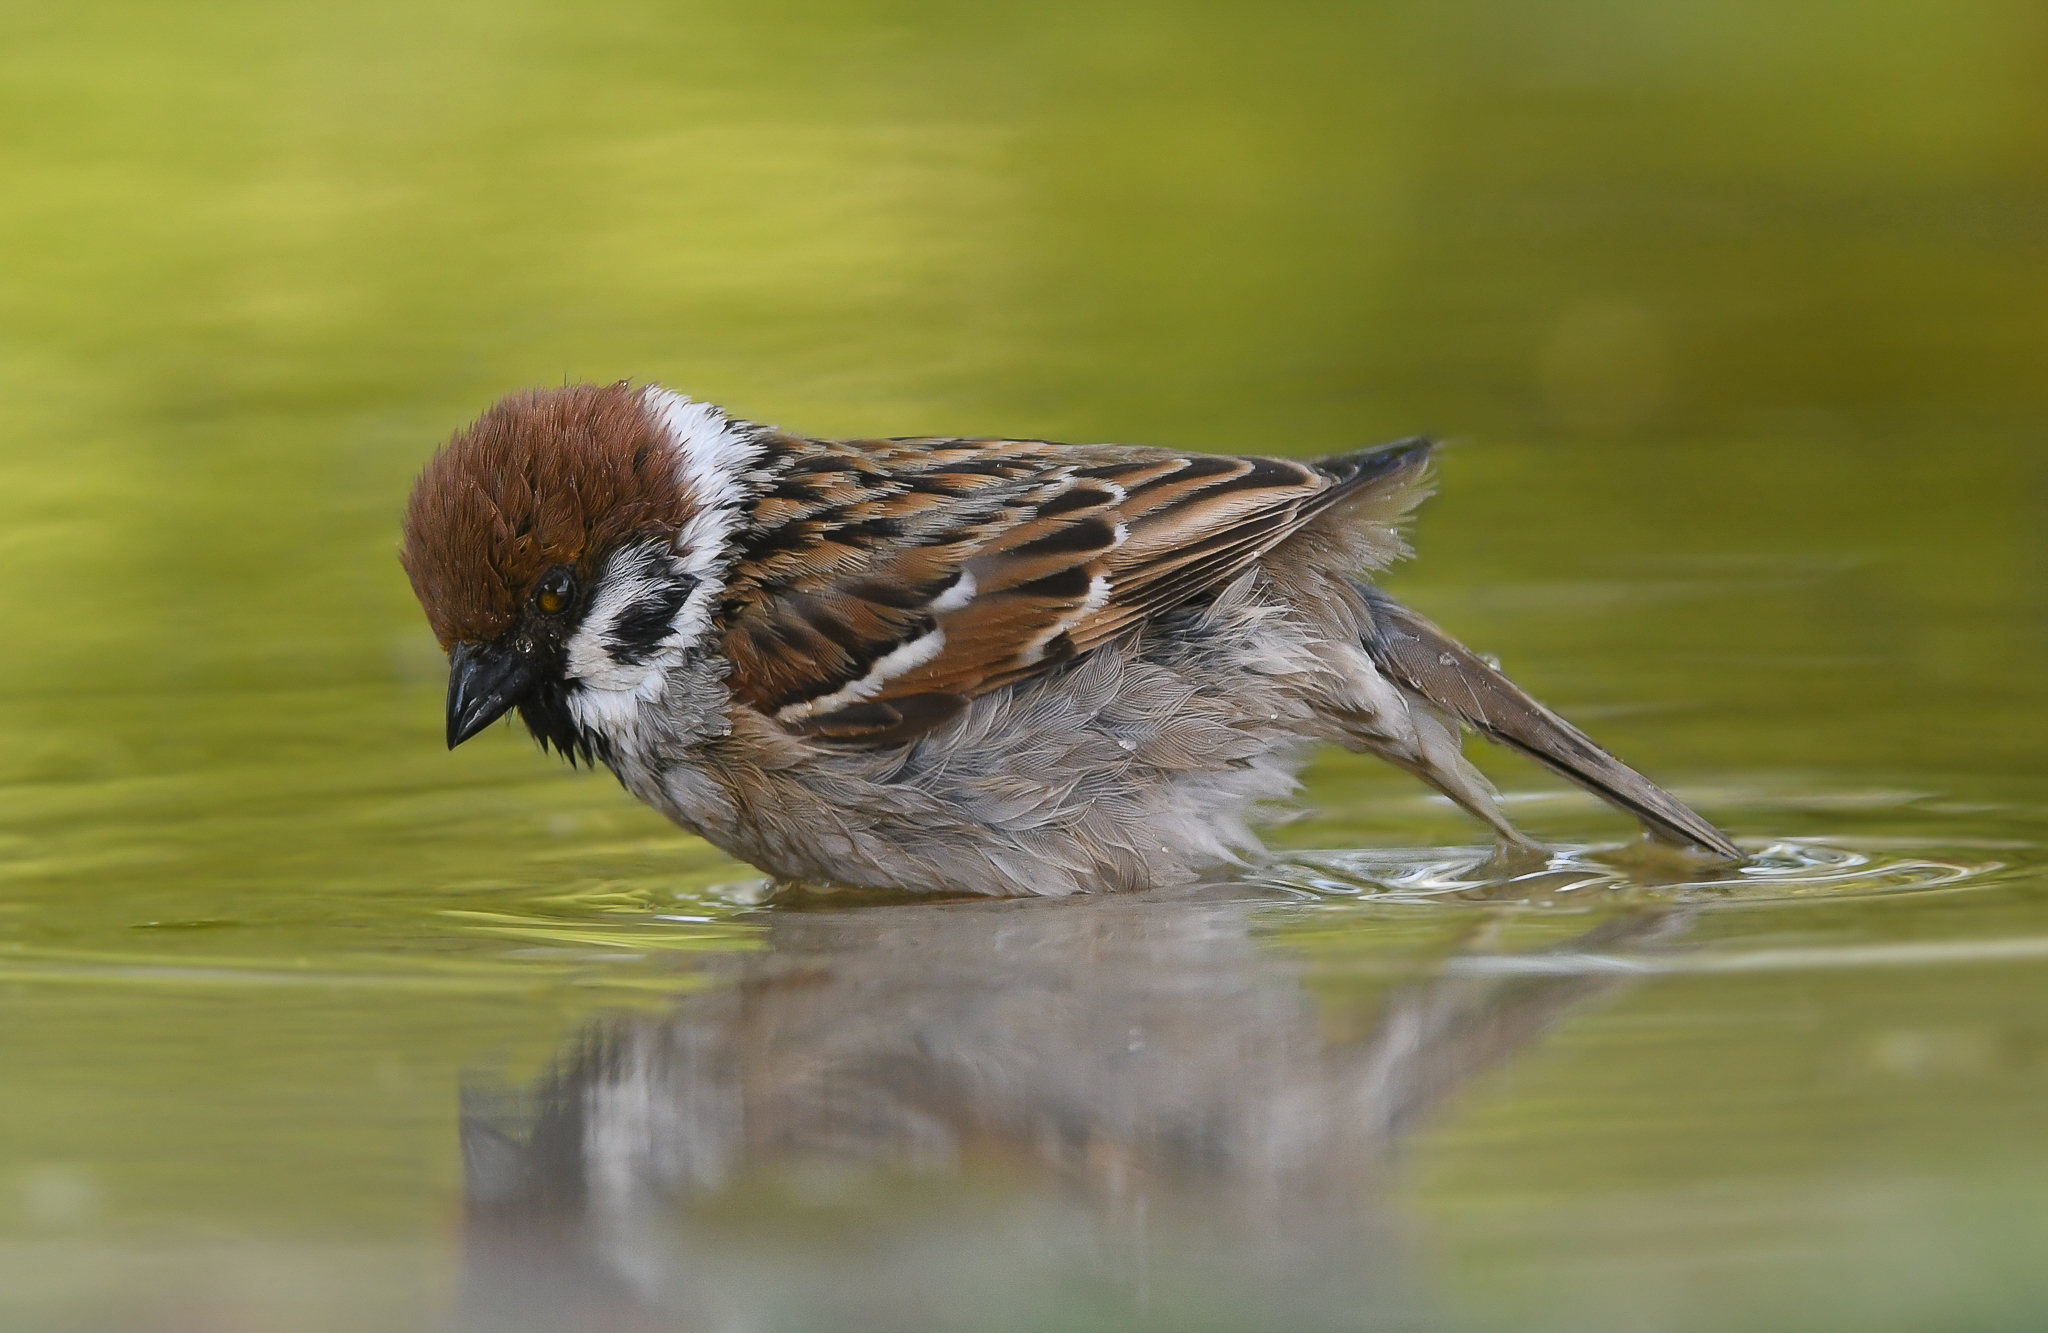 Sparrow reflected in the water ...